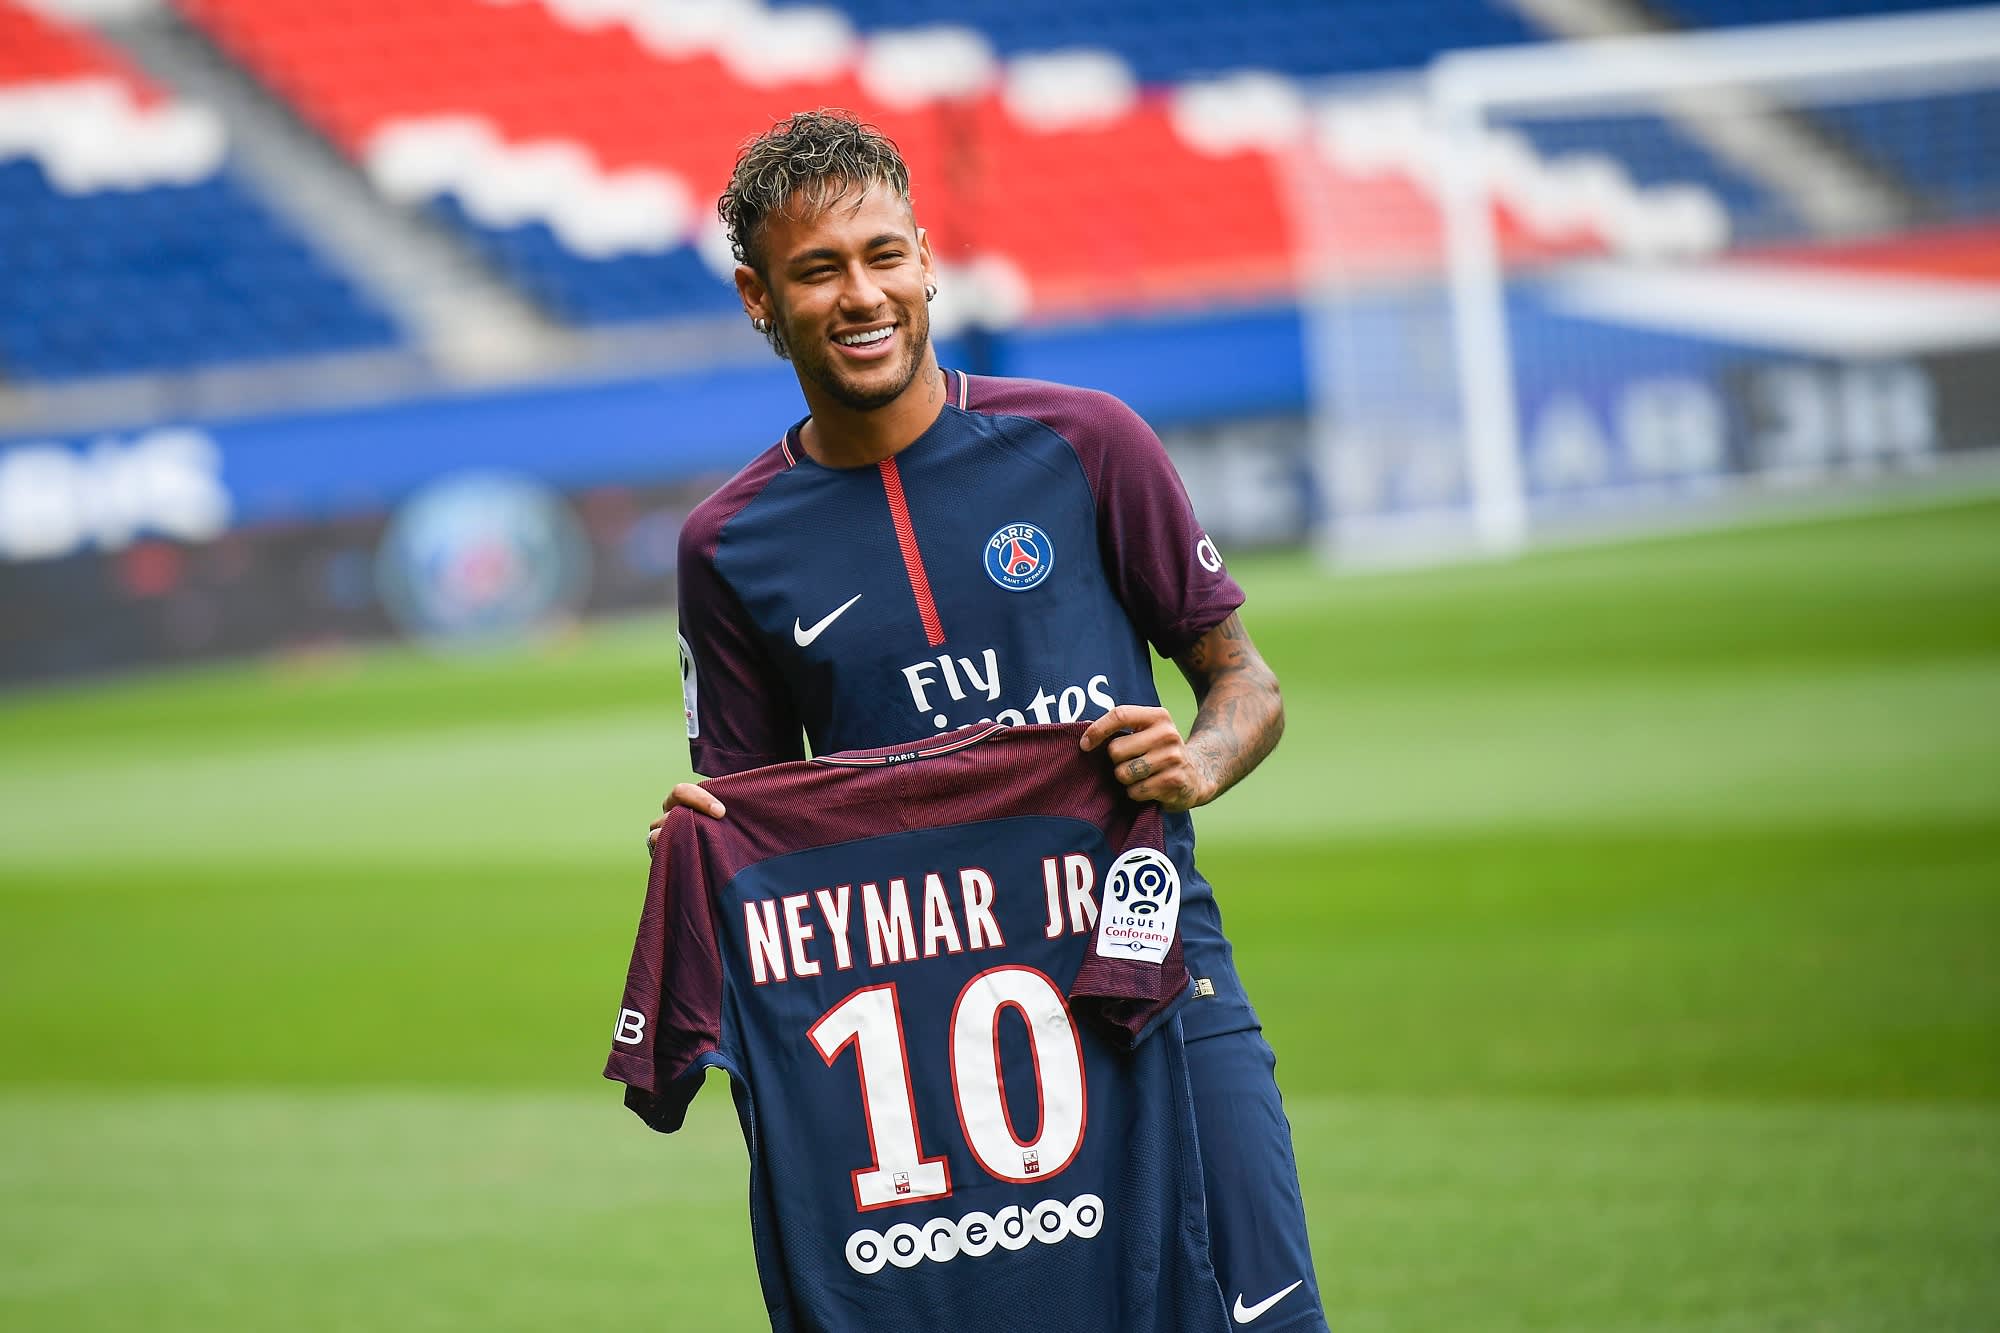 Nike cut up with Neymar after sexual assault investigation, report says